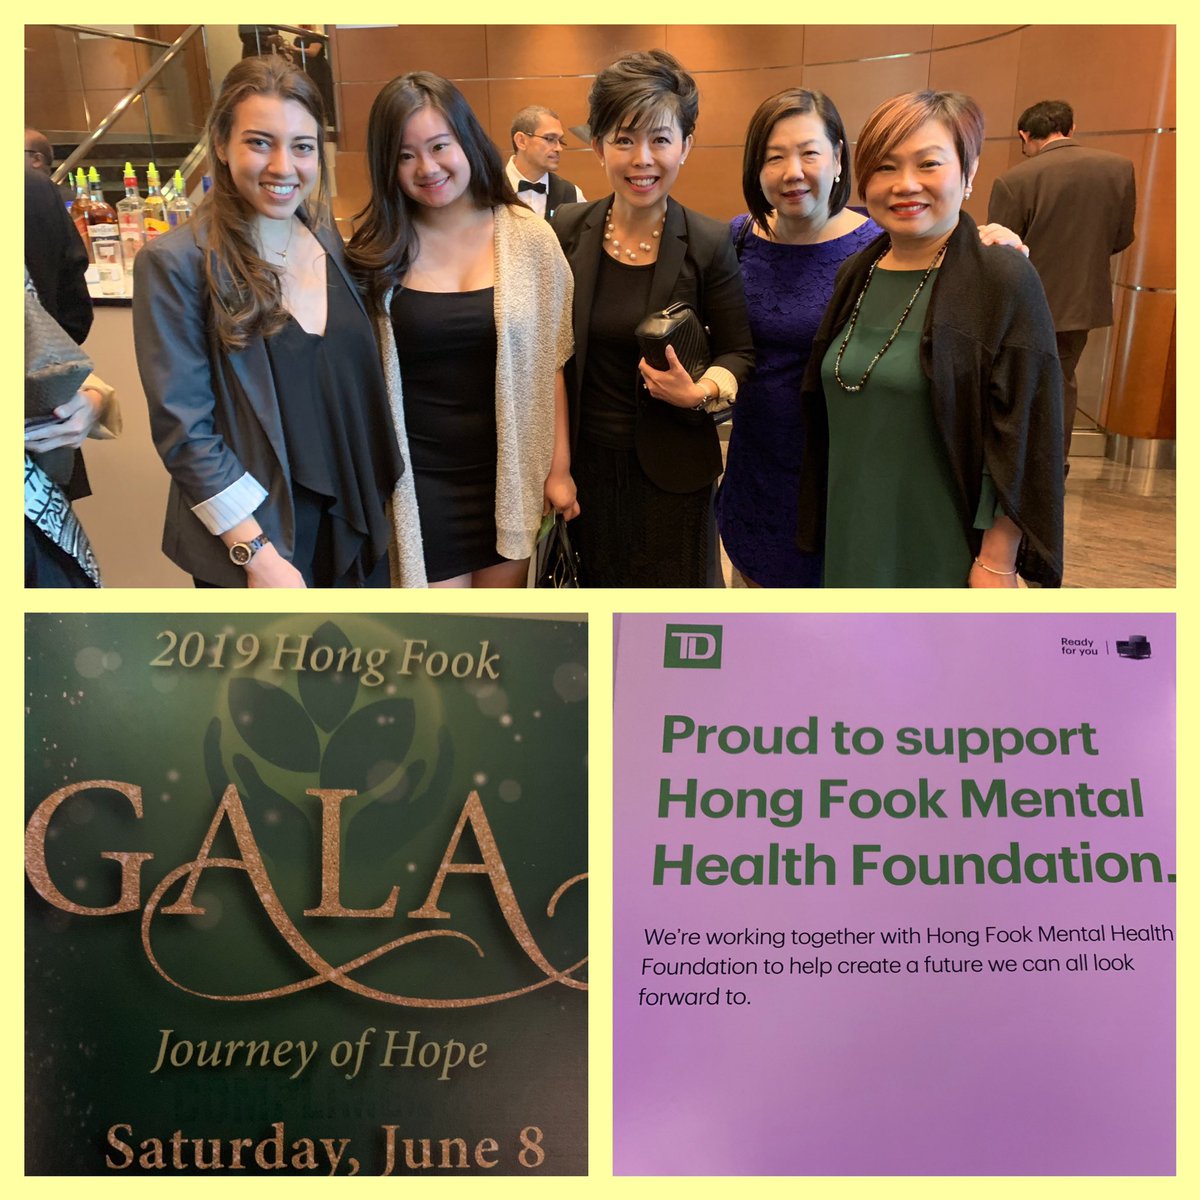 Great evening spent with colleagues & our community friends advocating 4 mental health.  TD is proud title sponsor for Hong Fook 2019 Journey of Hope gala. One step forward to help create a more inclusive tomorrow where we can feel confident & belonged. #ReadyCommitment